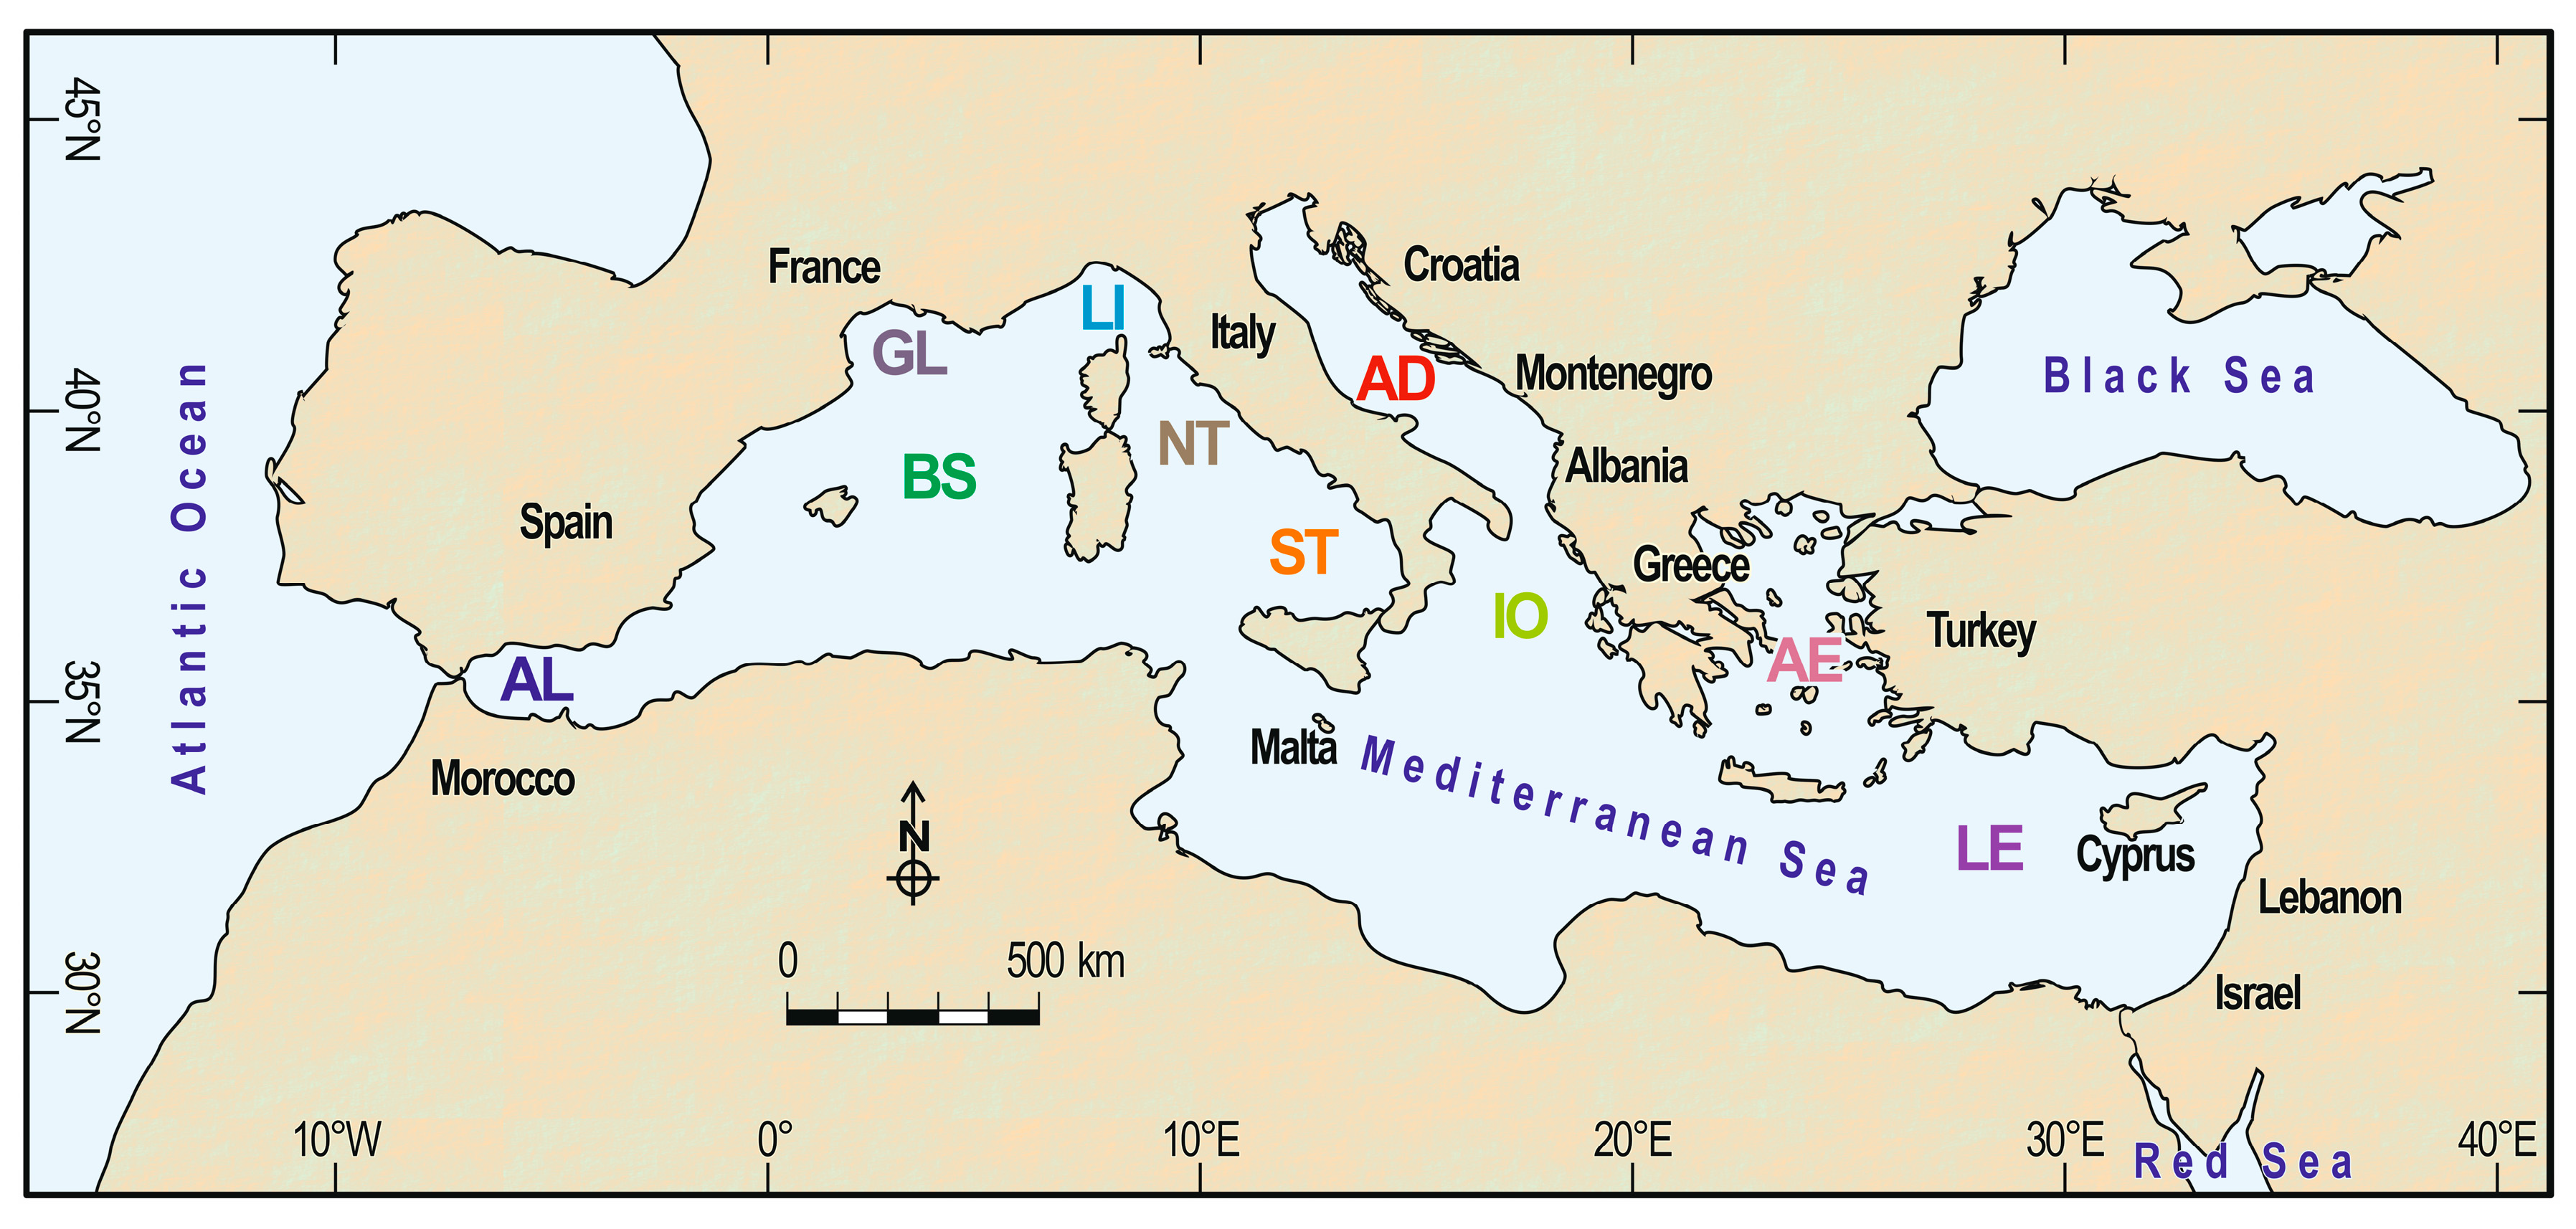 Diversity | Free Full-Text | Distribution and Ecology of Decapod  Crustaceans in Mediterranean Marine Caves: A Review | HTML